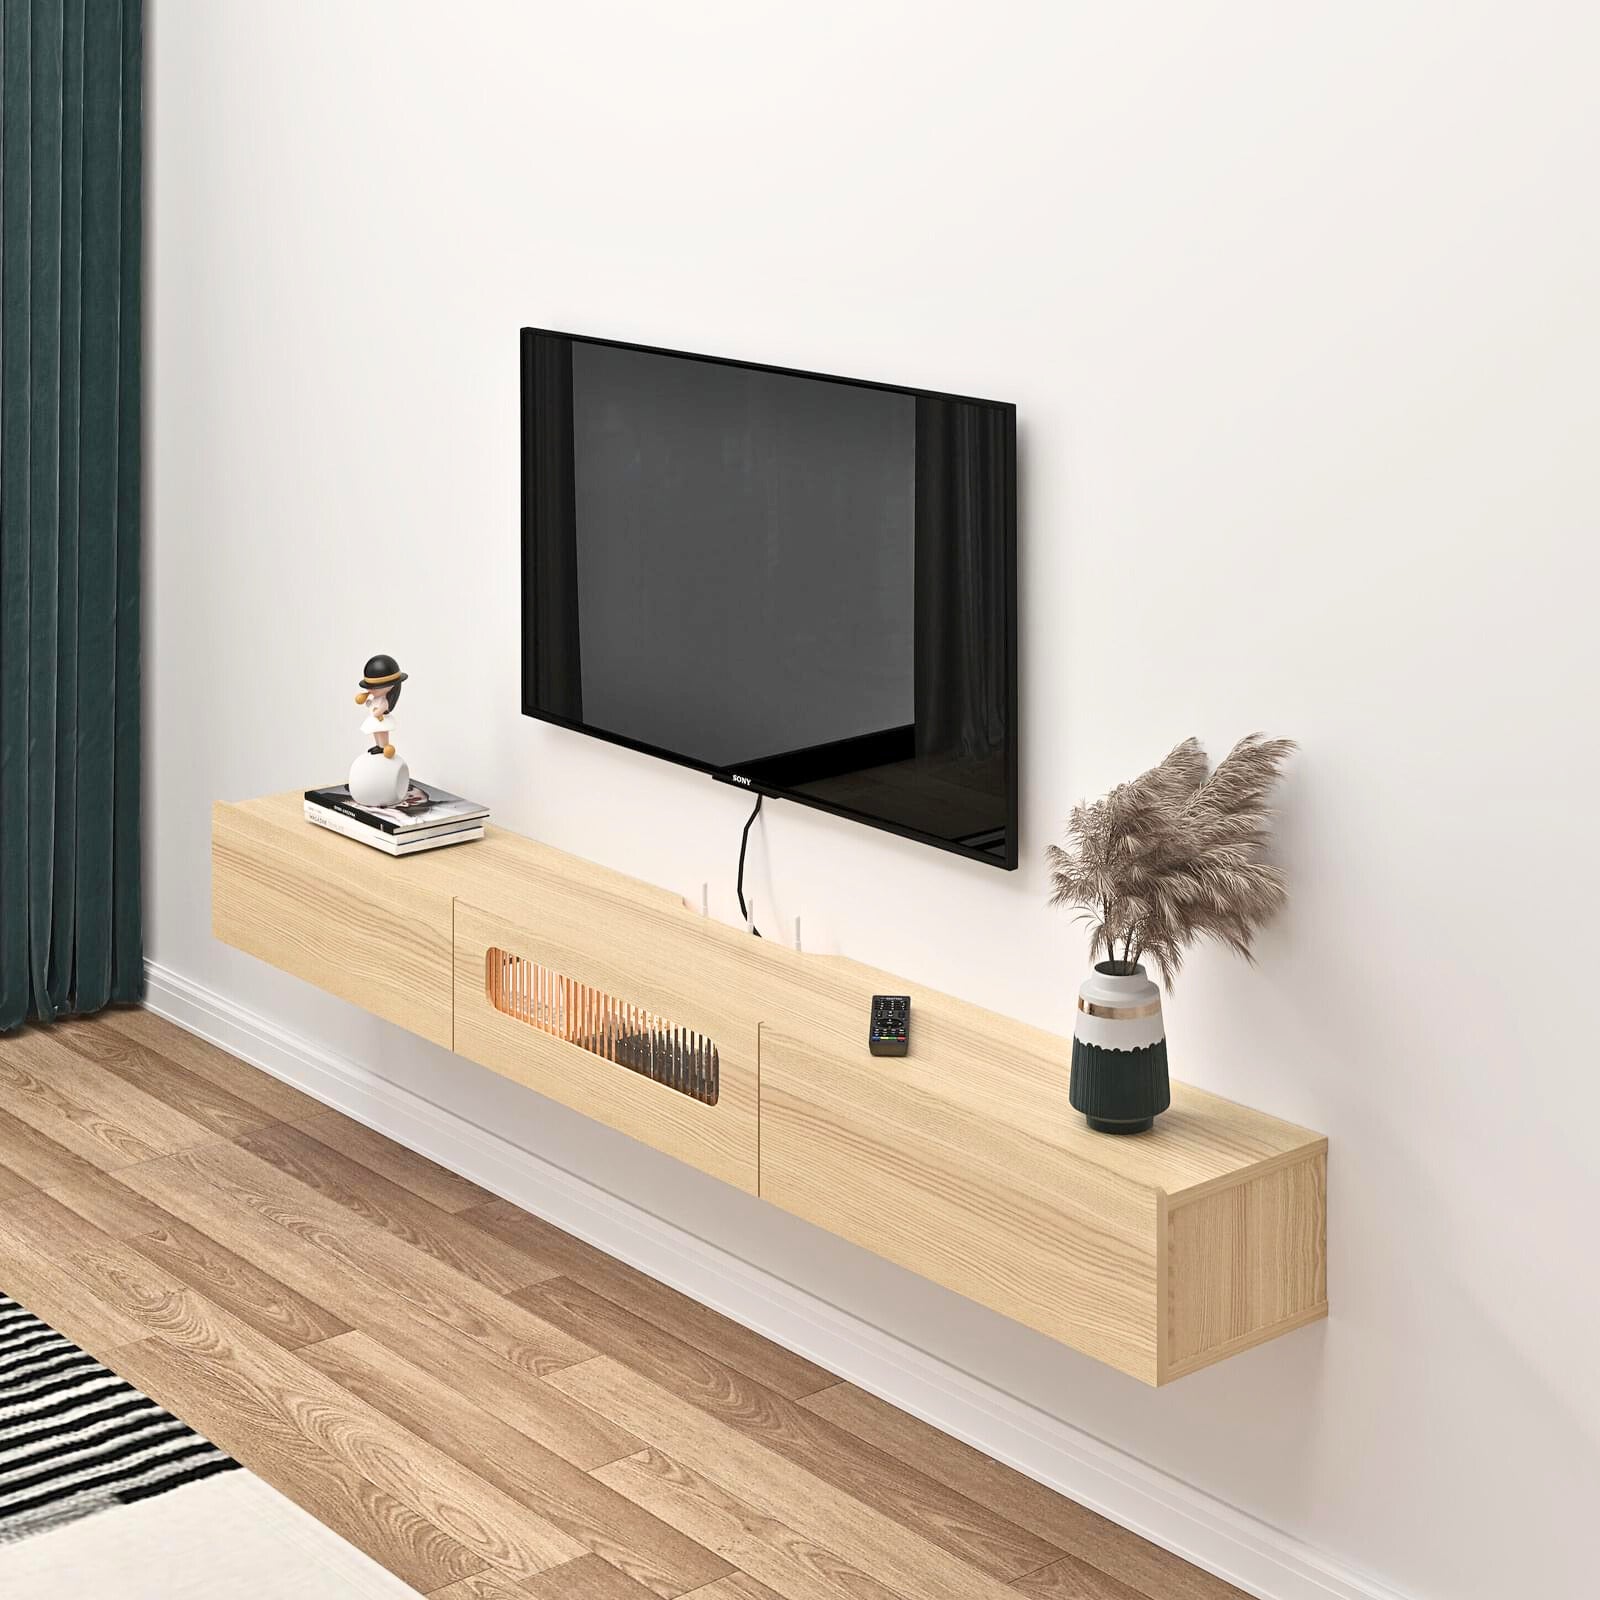 Customize Light Oak Floating TV Stand Wall Shelf with LED Lights and Storage Drawers